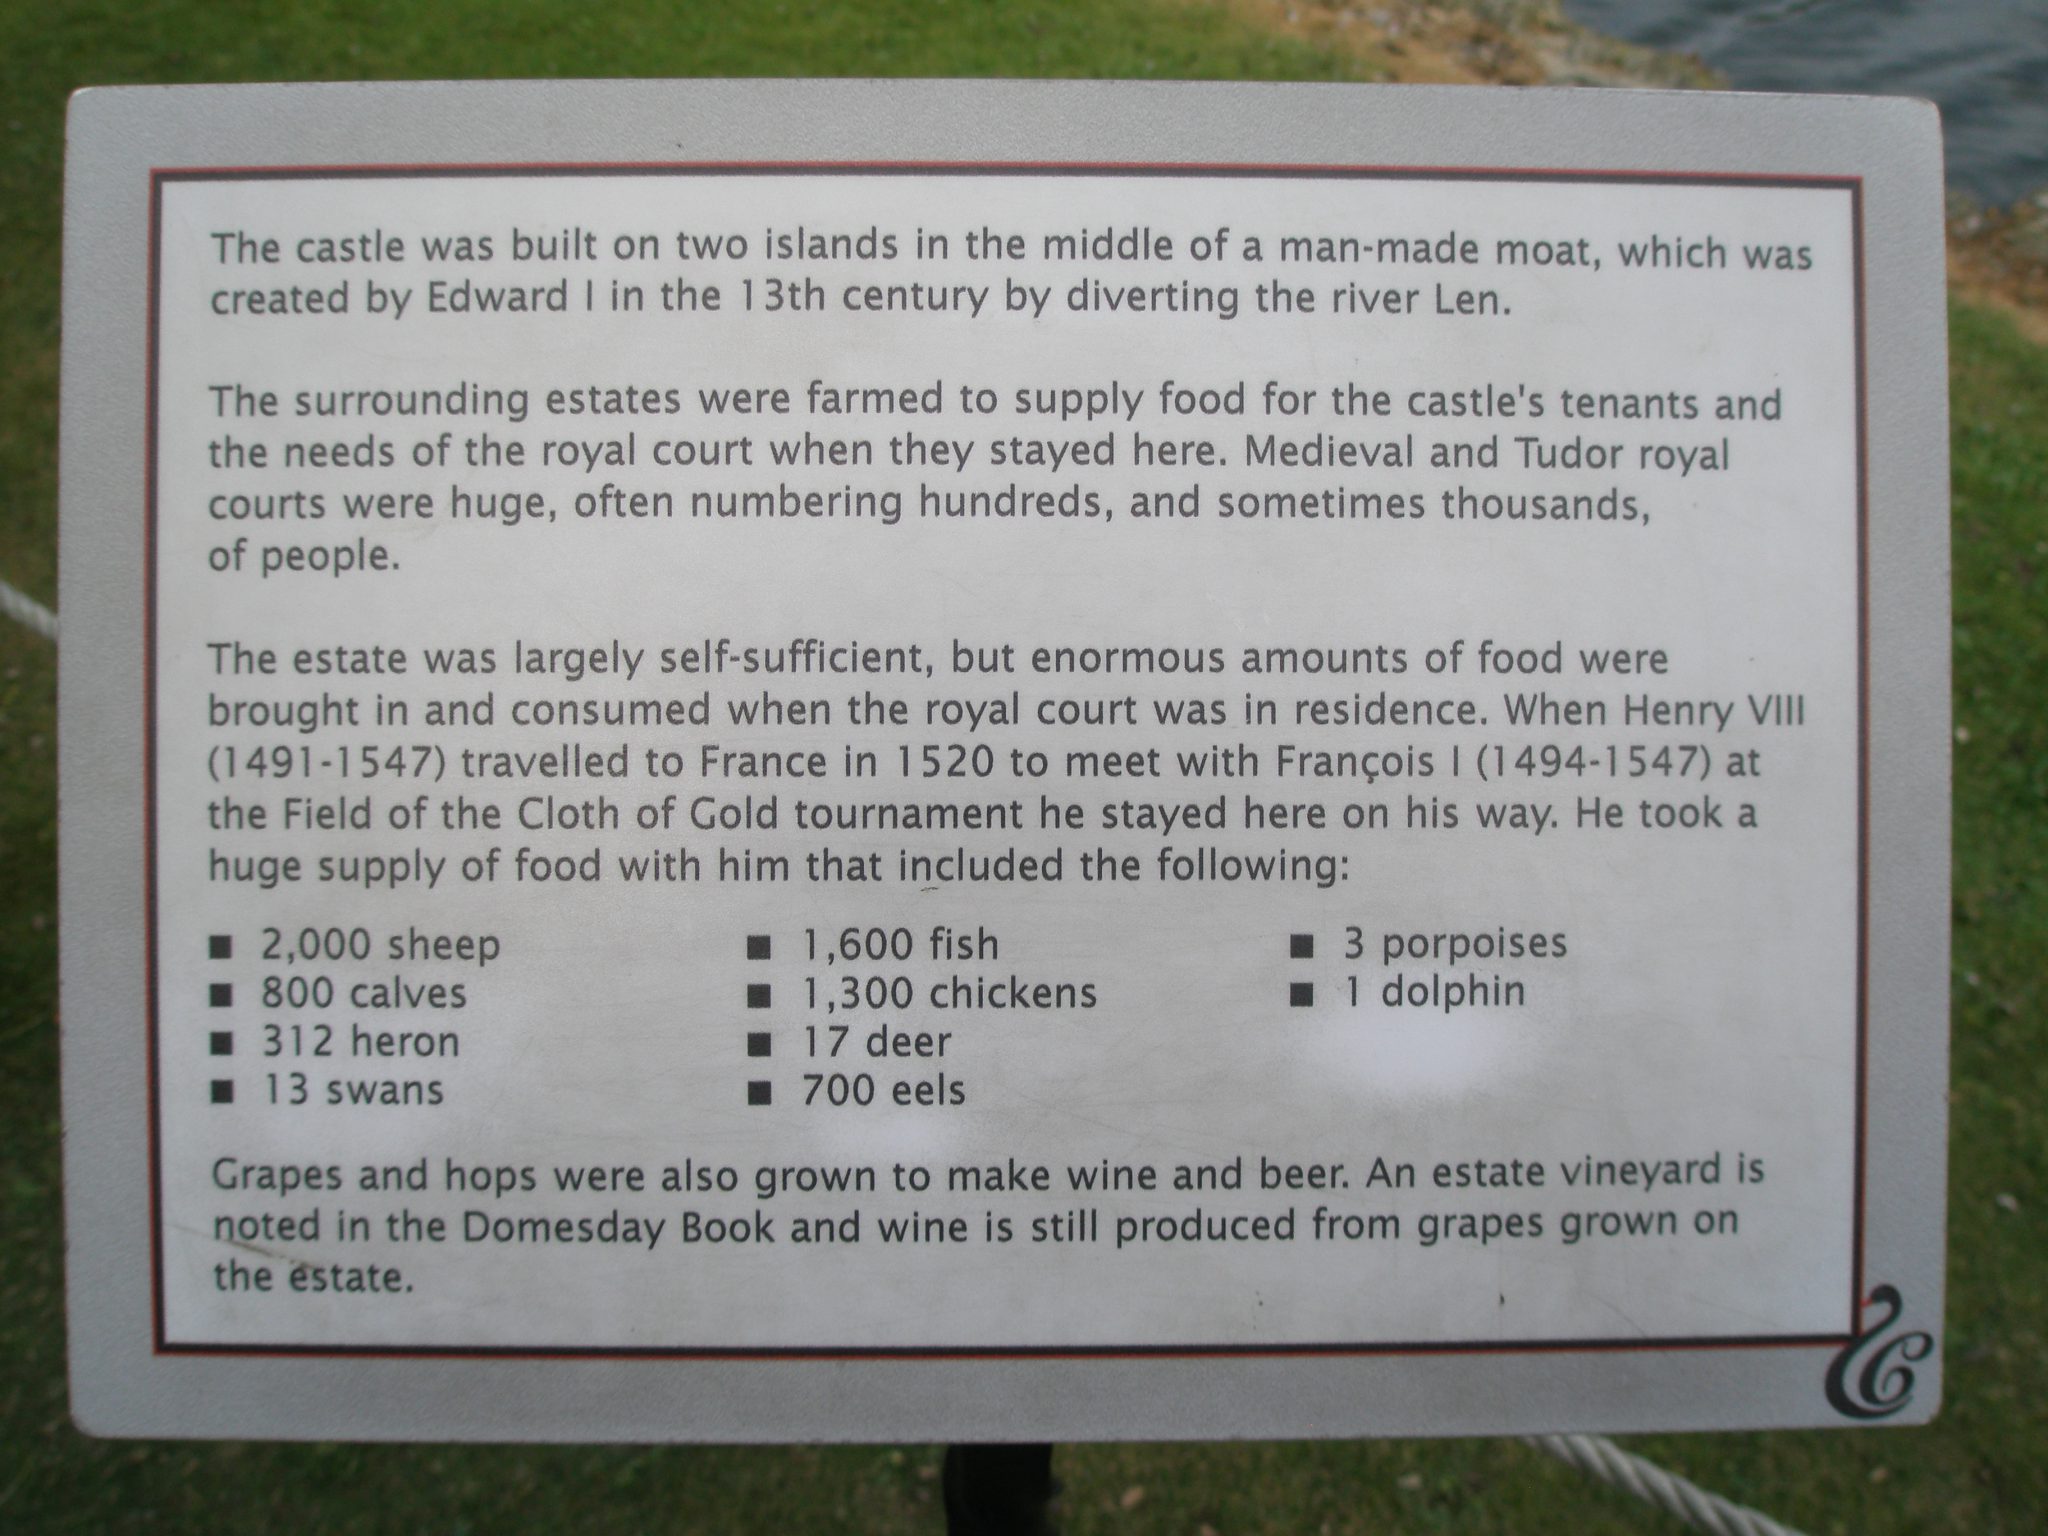 The Estate at Leeds Castle was nearly self-sufficient.